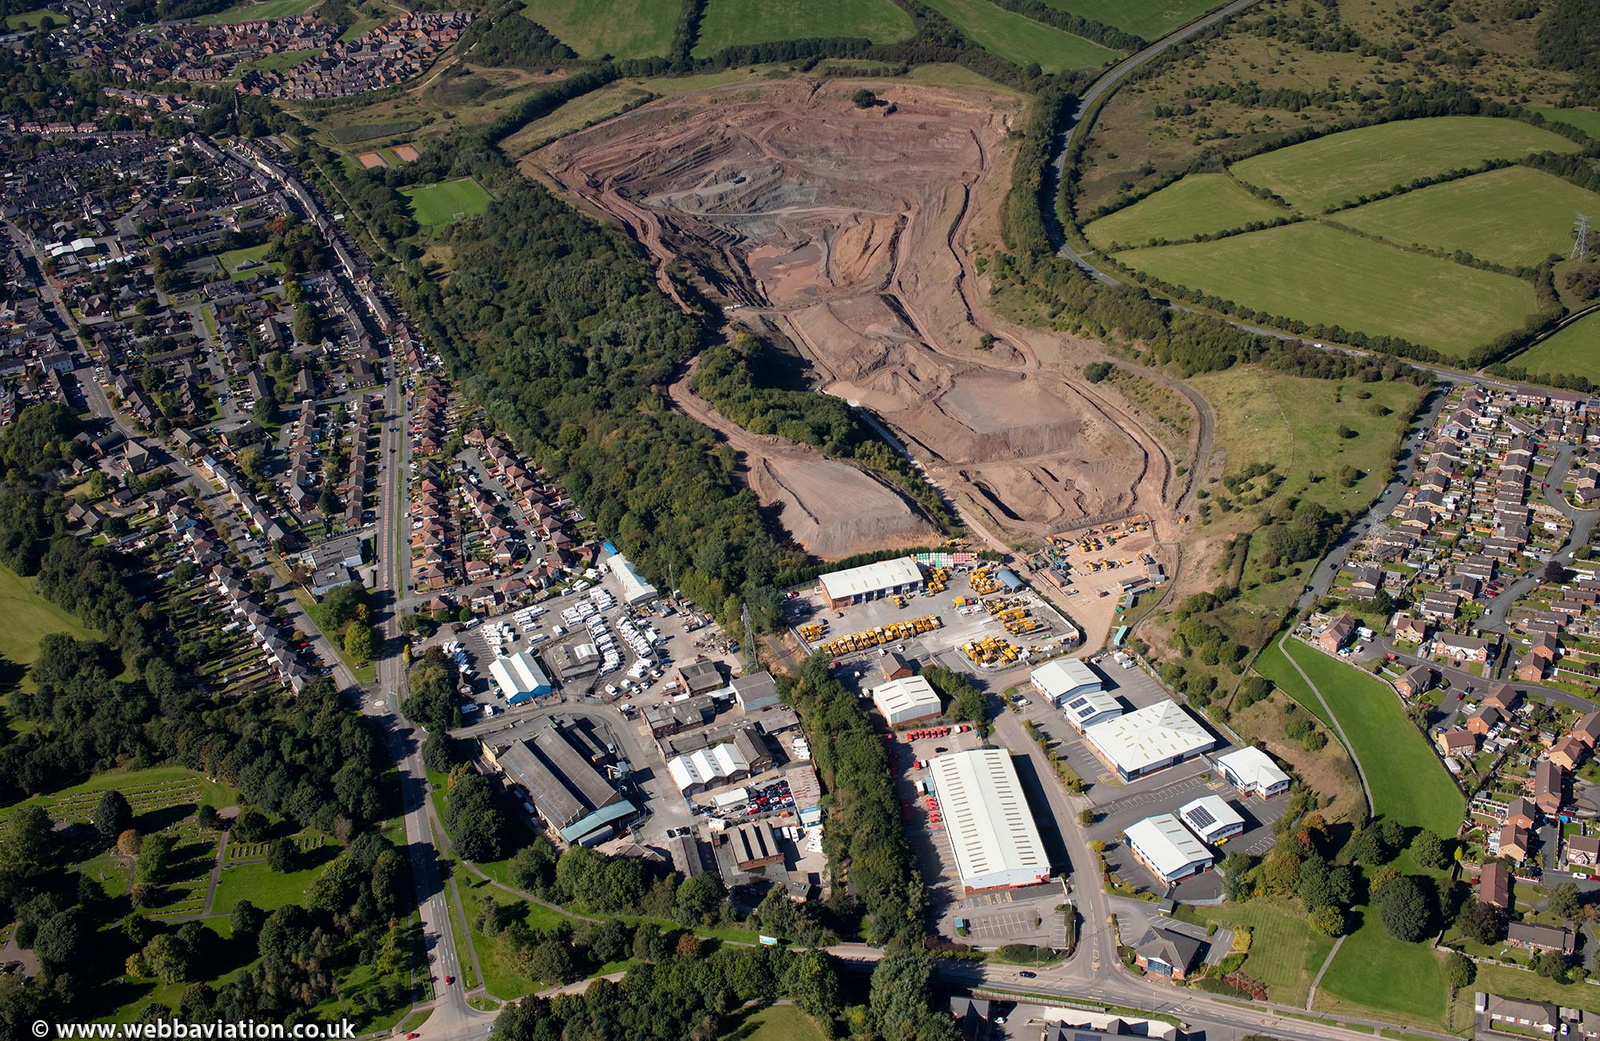 Knutton Quarry Newcastle-under-Lyme Staffordshire  from the air 